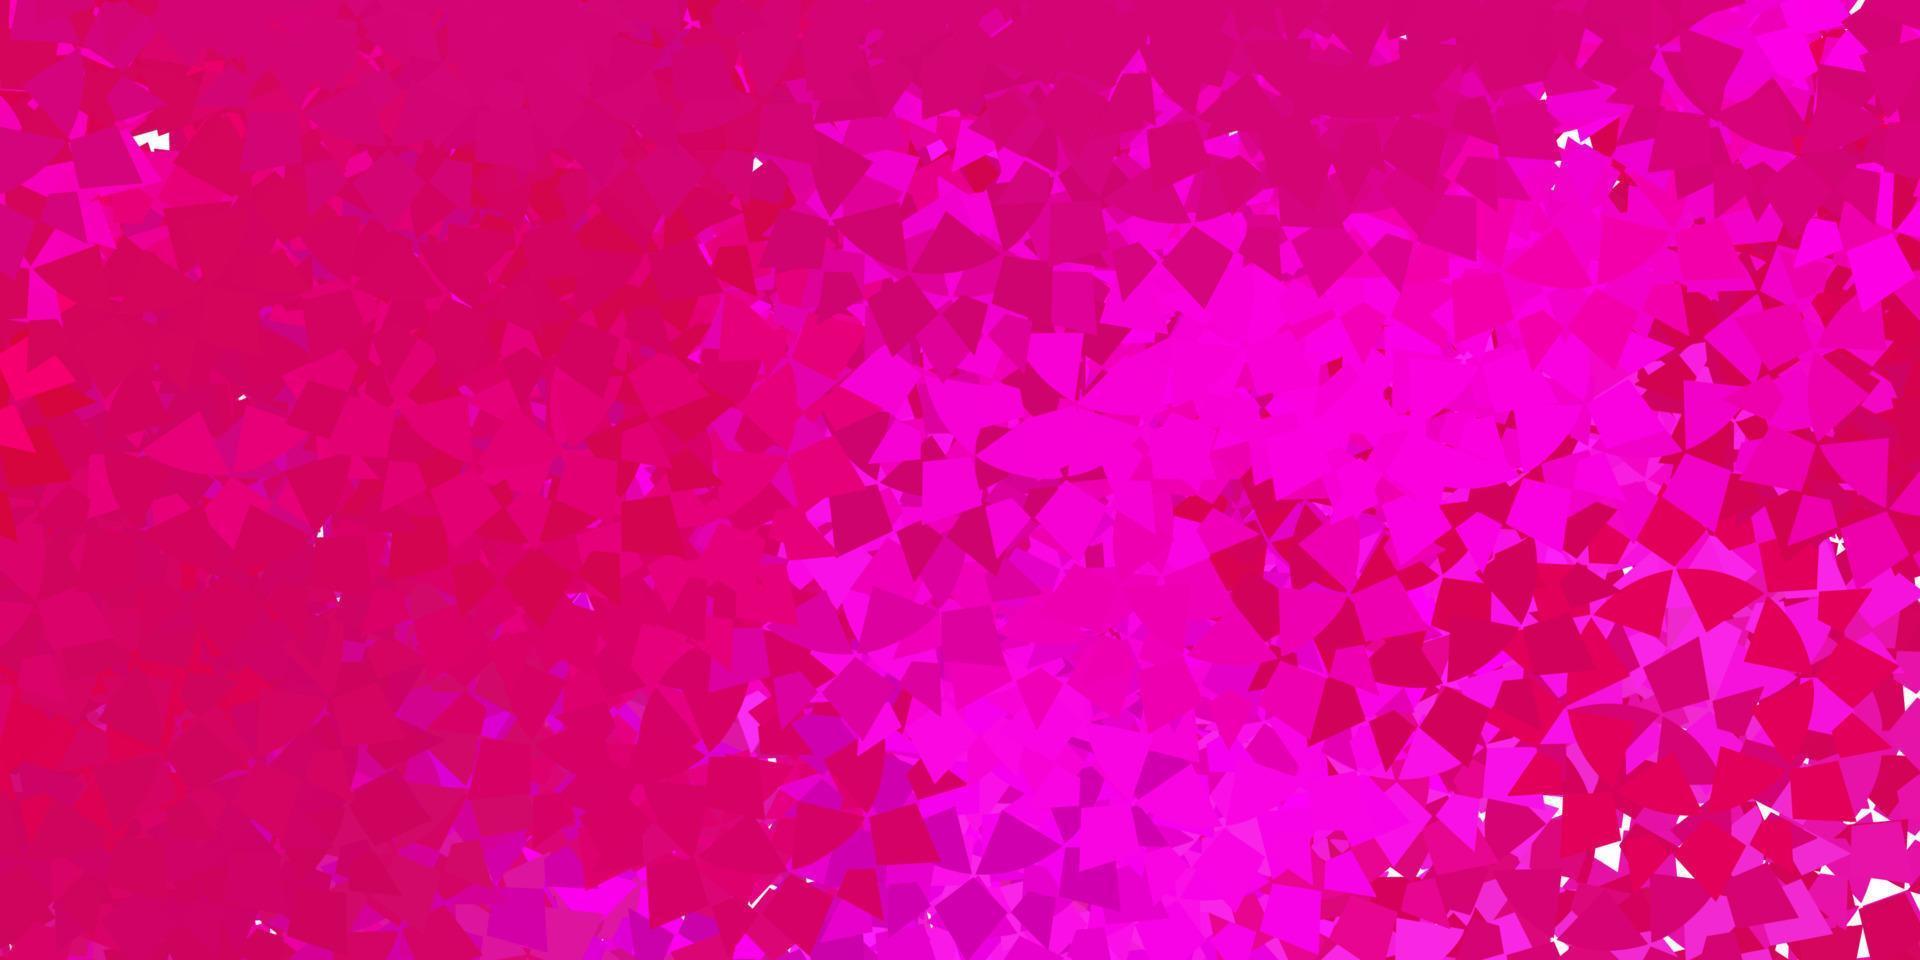 Dark pink vector pattern with polygonal shapes.